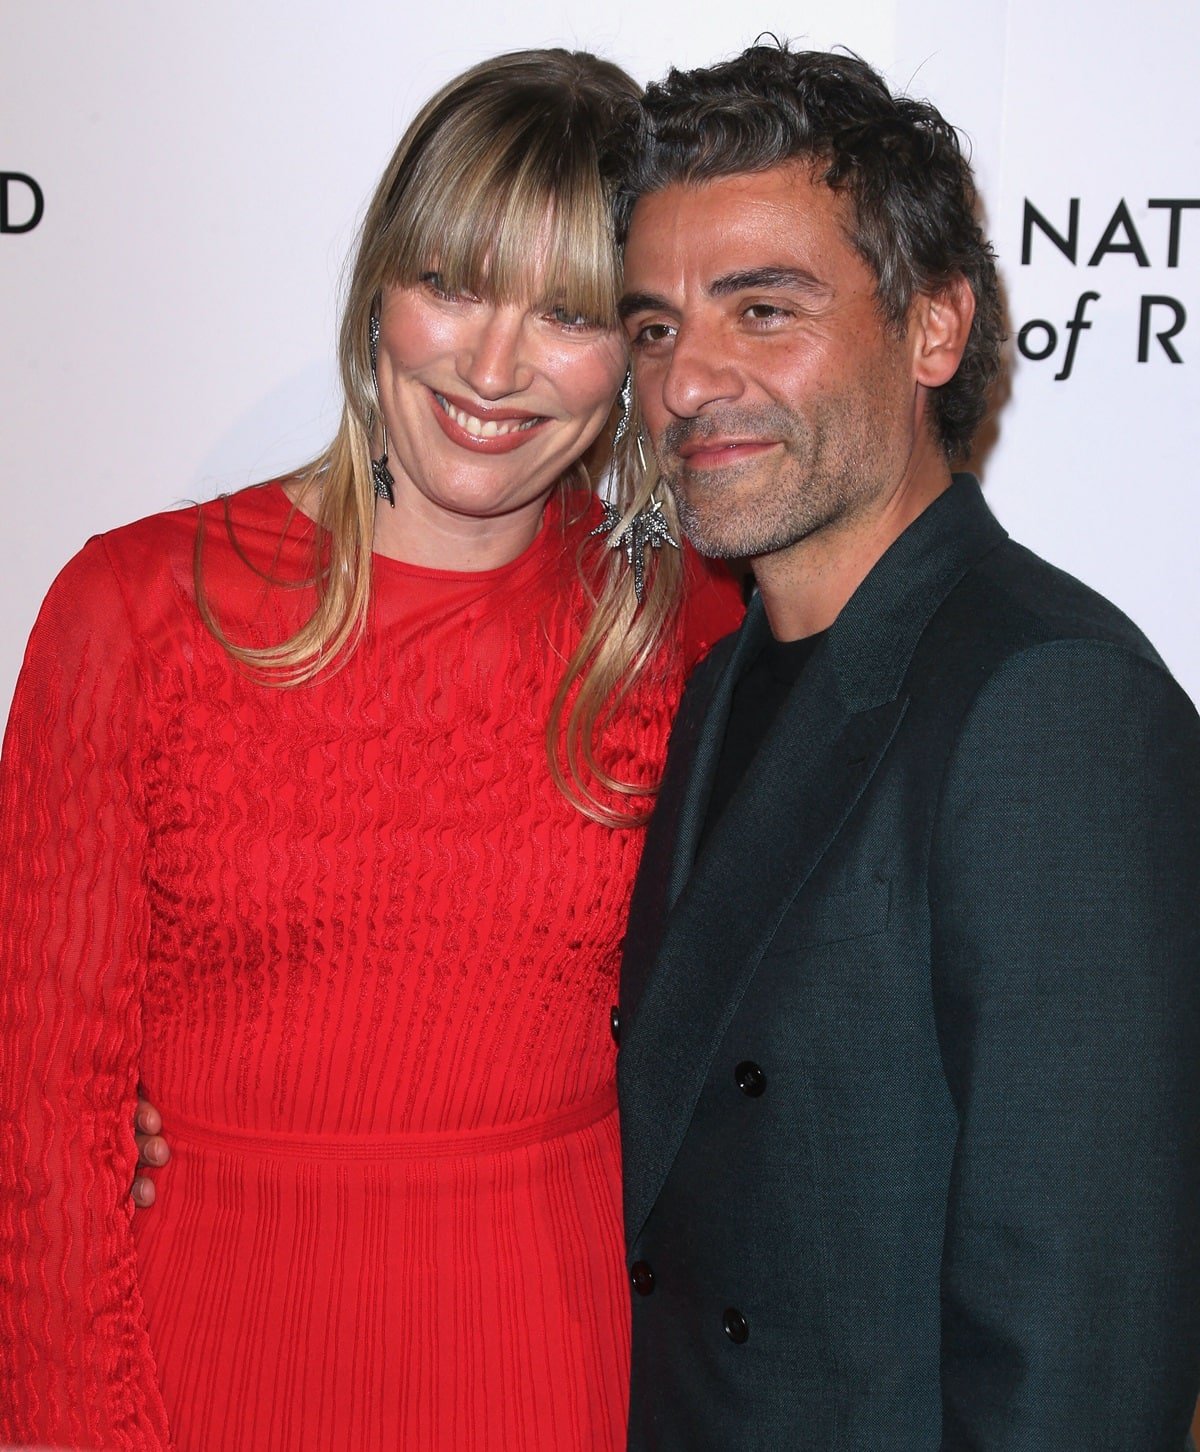 Elvira Lind is a Danish documentary filmmaker who is married to American actor and producer Oscar Isaac, and the couple has two sons together while also occasionally collaborating professionally